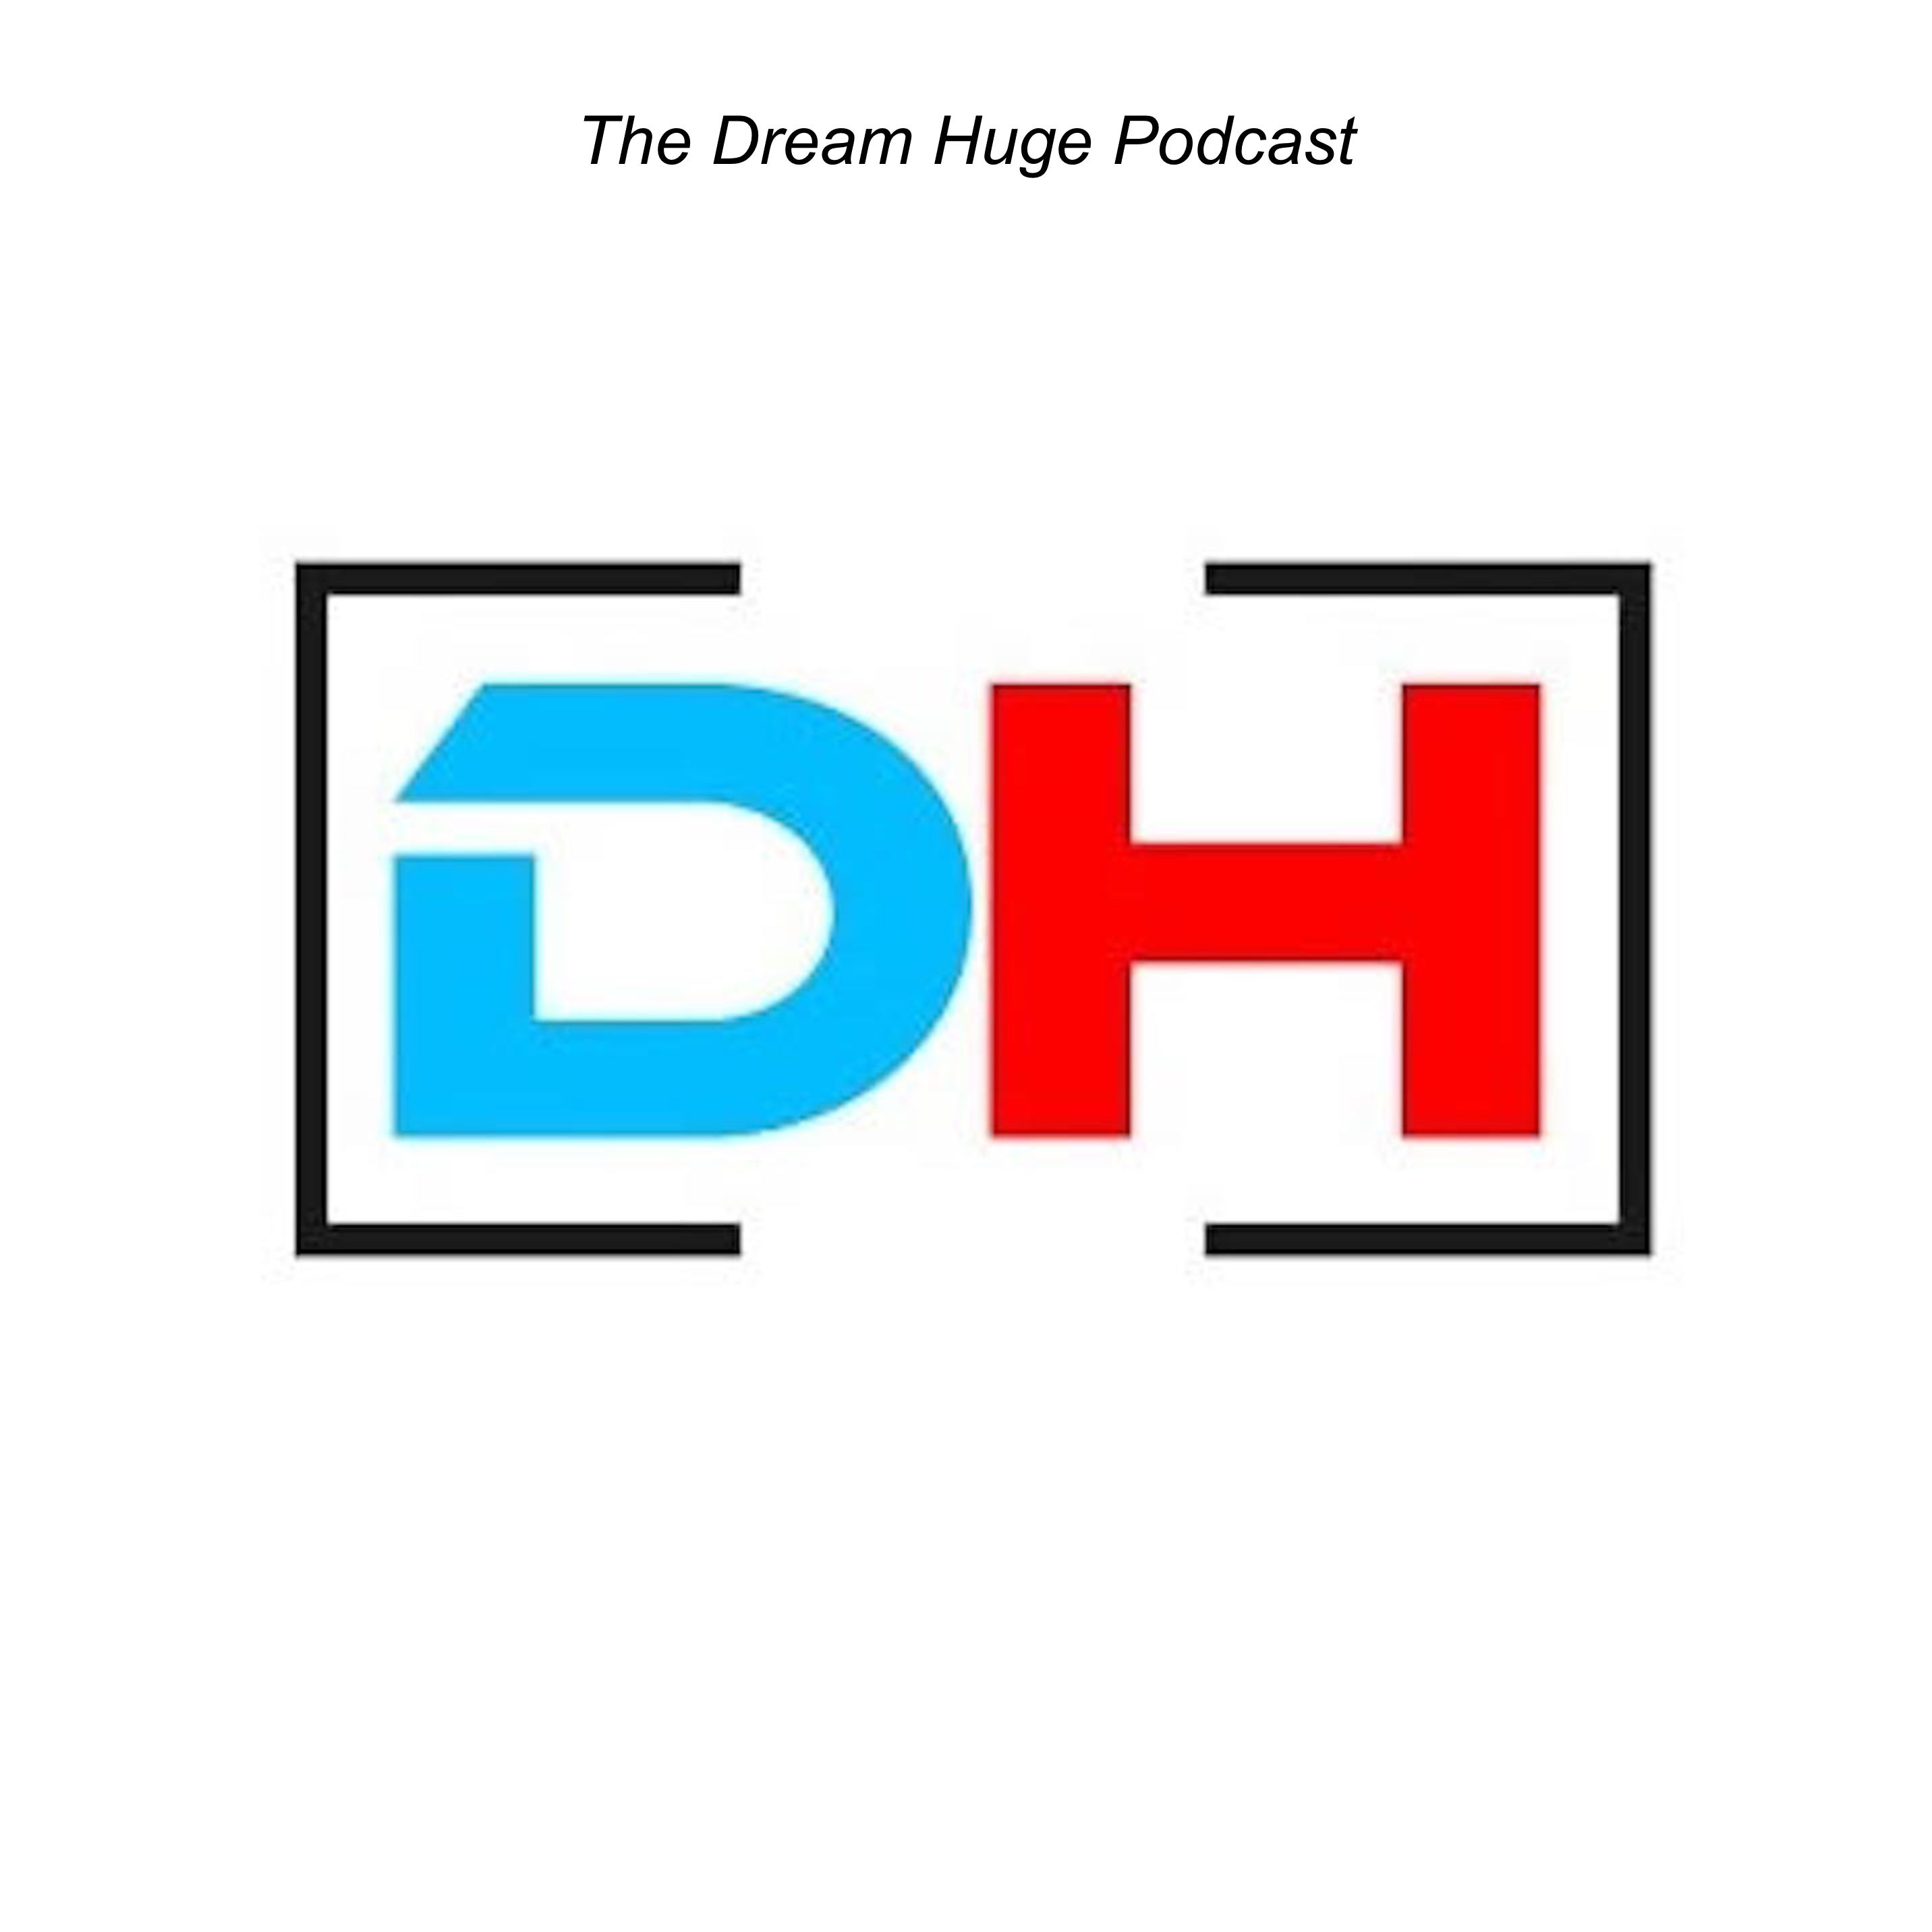 The Dream Huge Podcast